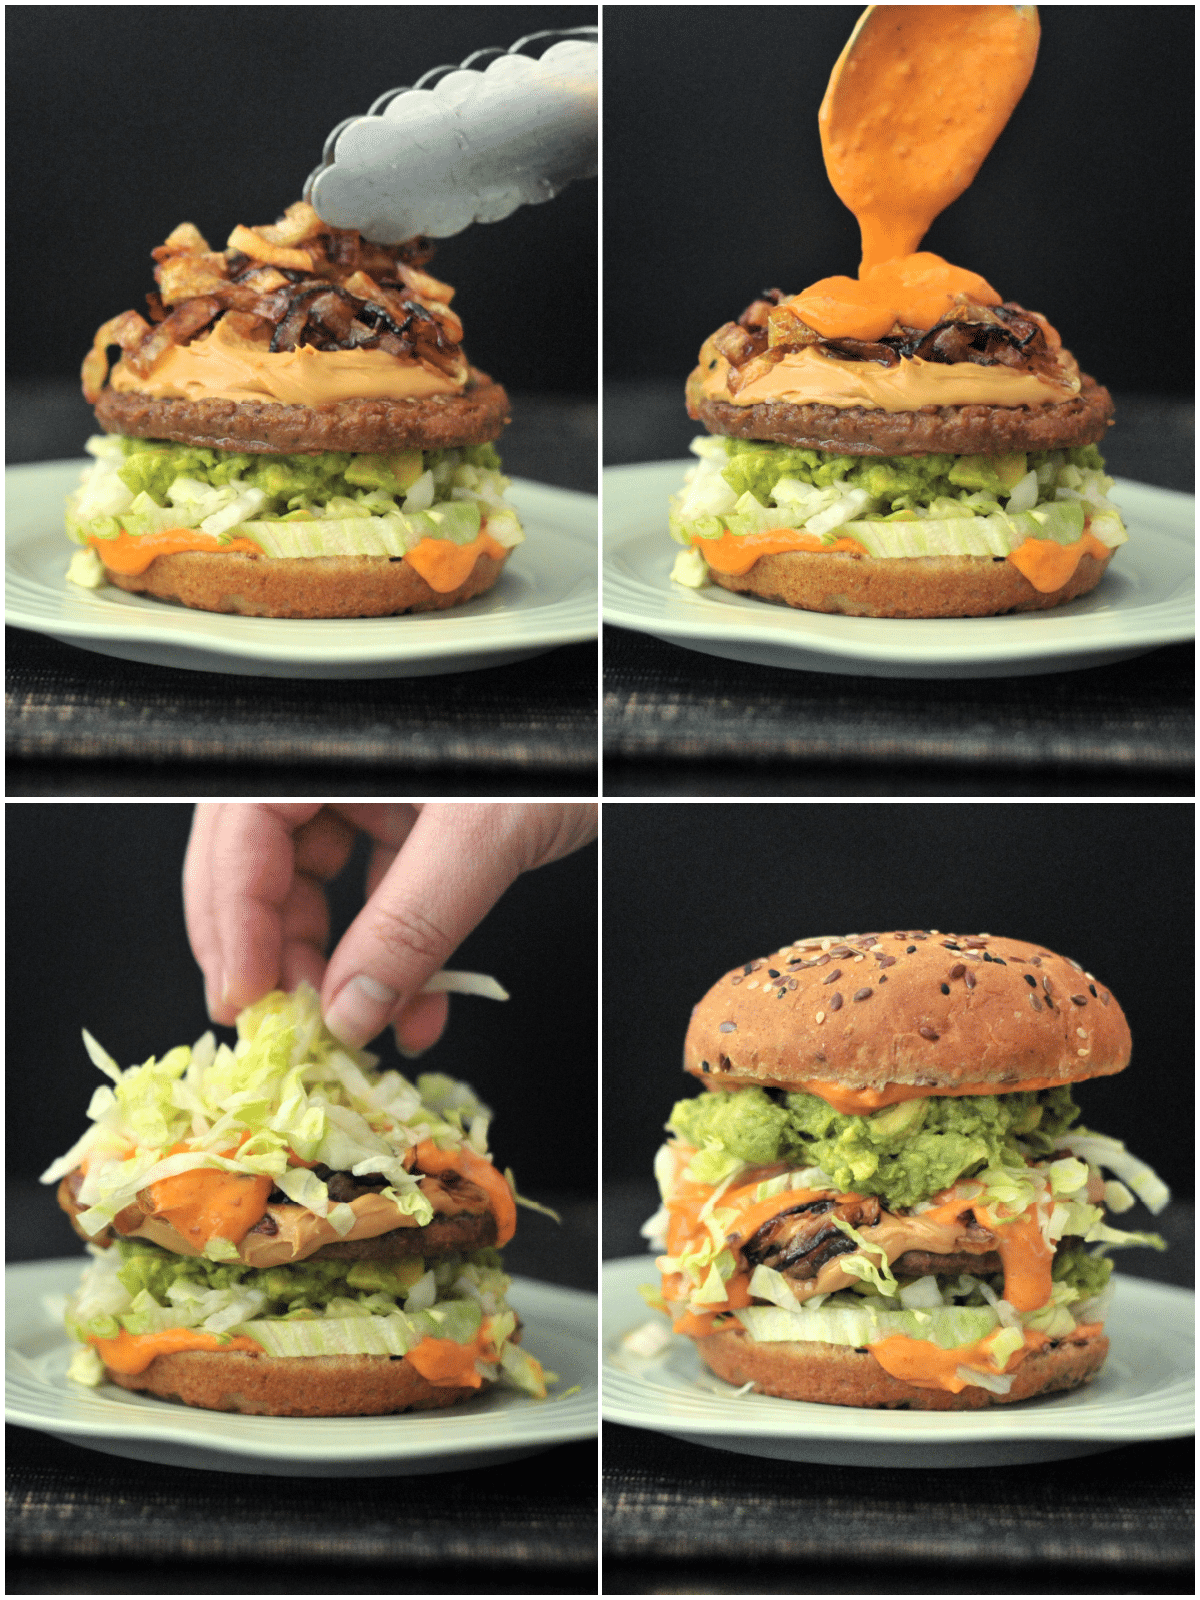 a four photo collage shows last steps in how to make a spicy peanut butter burger: add caramelized onion, add spicy kimchi sauce, add shredded lettuce, add top bun.